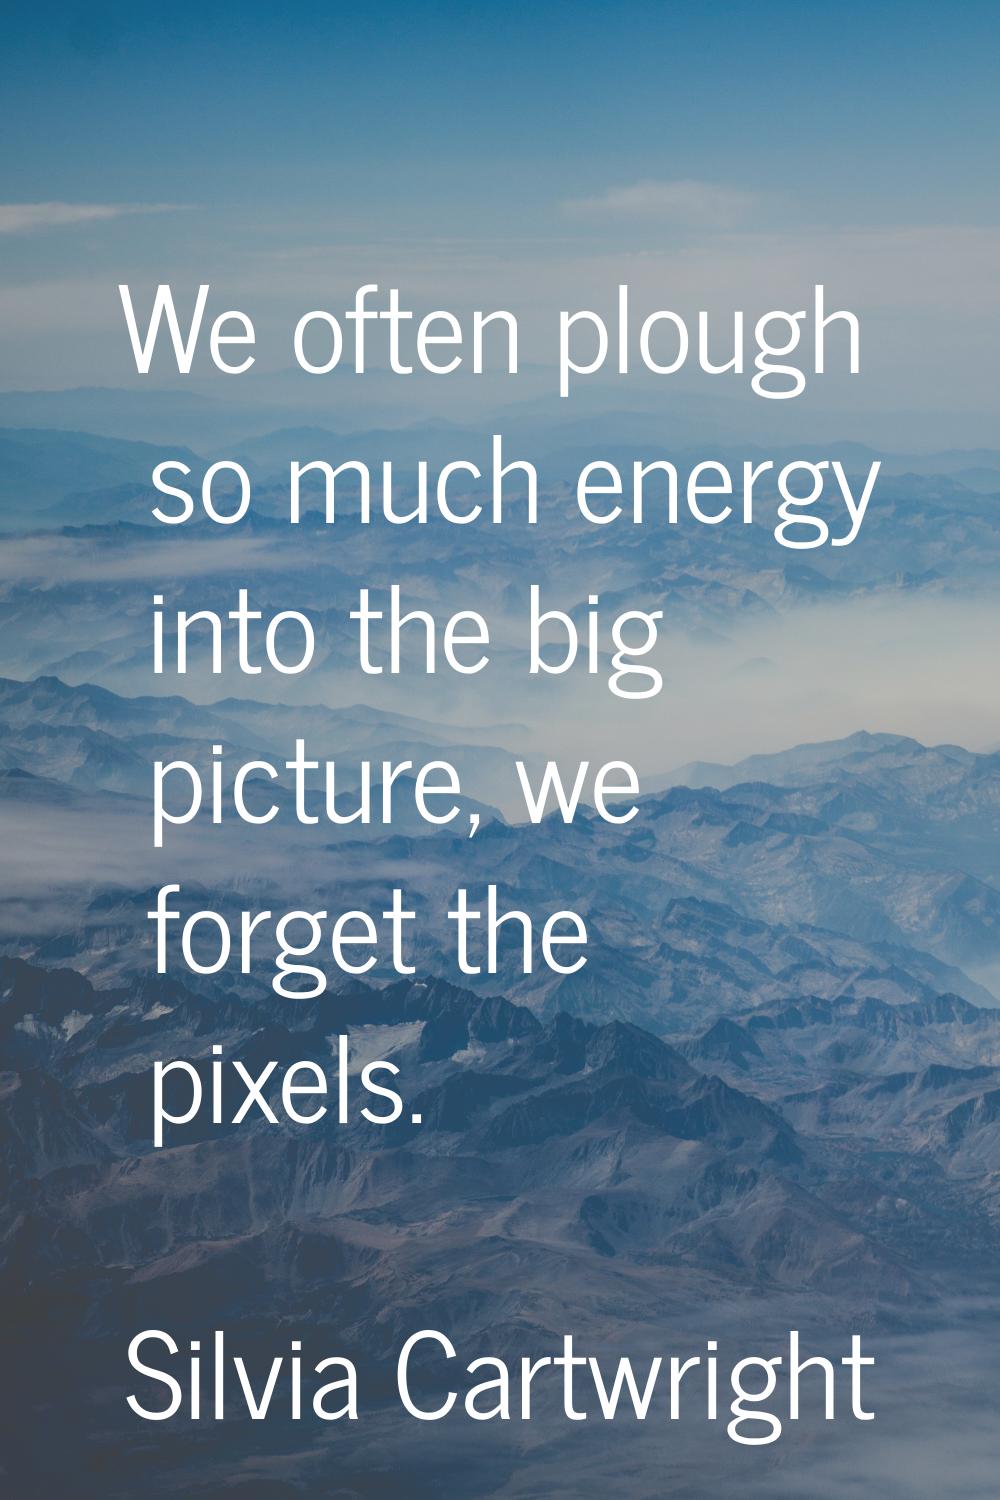 We often plough so much energy into the big picture, we forget the pixels.